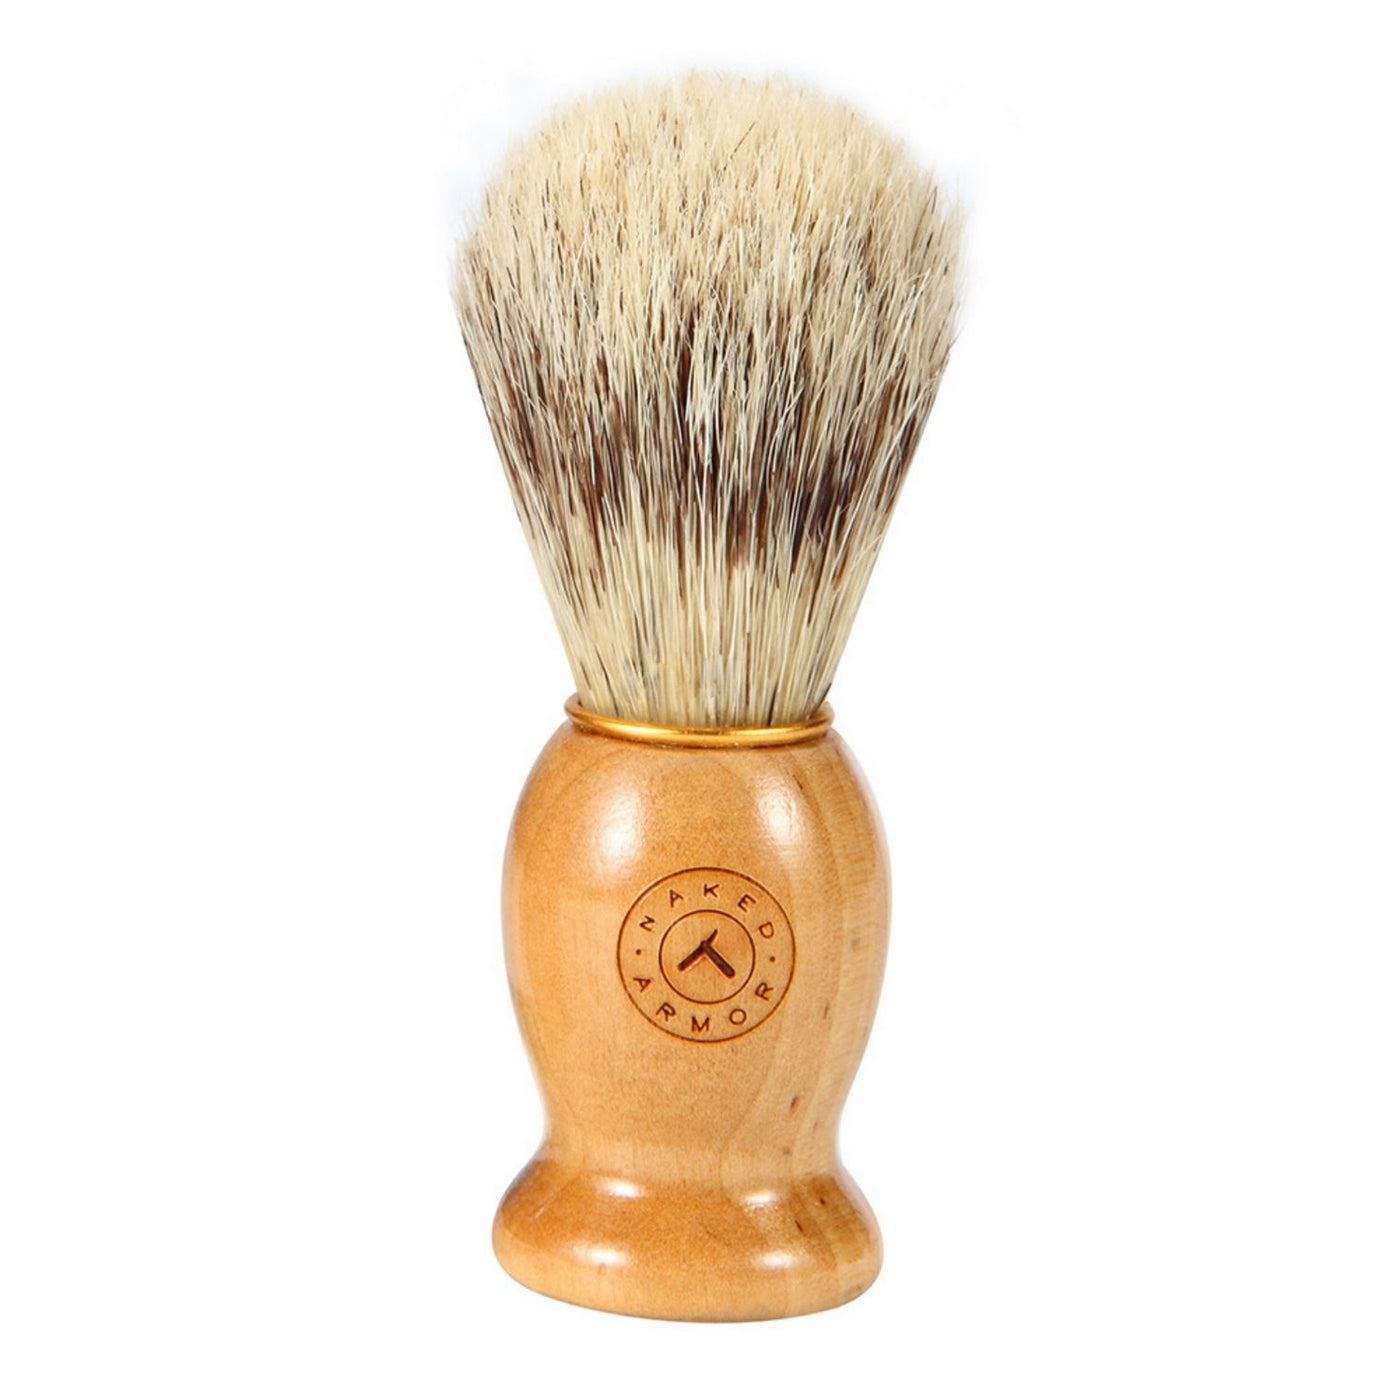  Lucan Wood Brush by Naked Armor sold by Naked Armor Razors